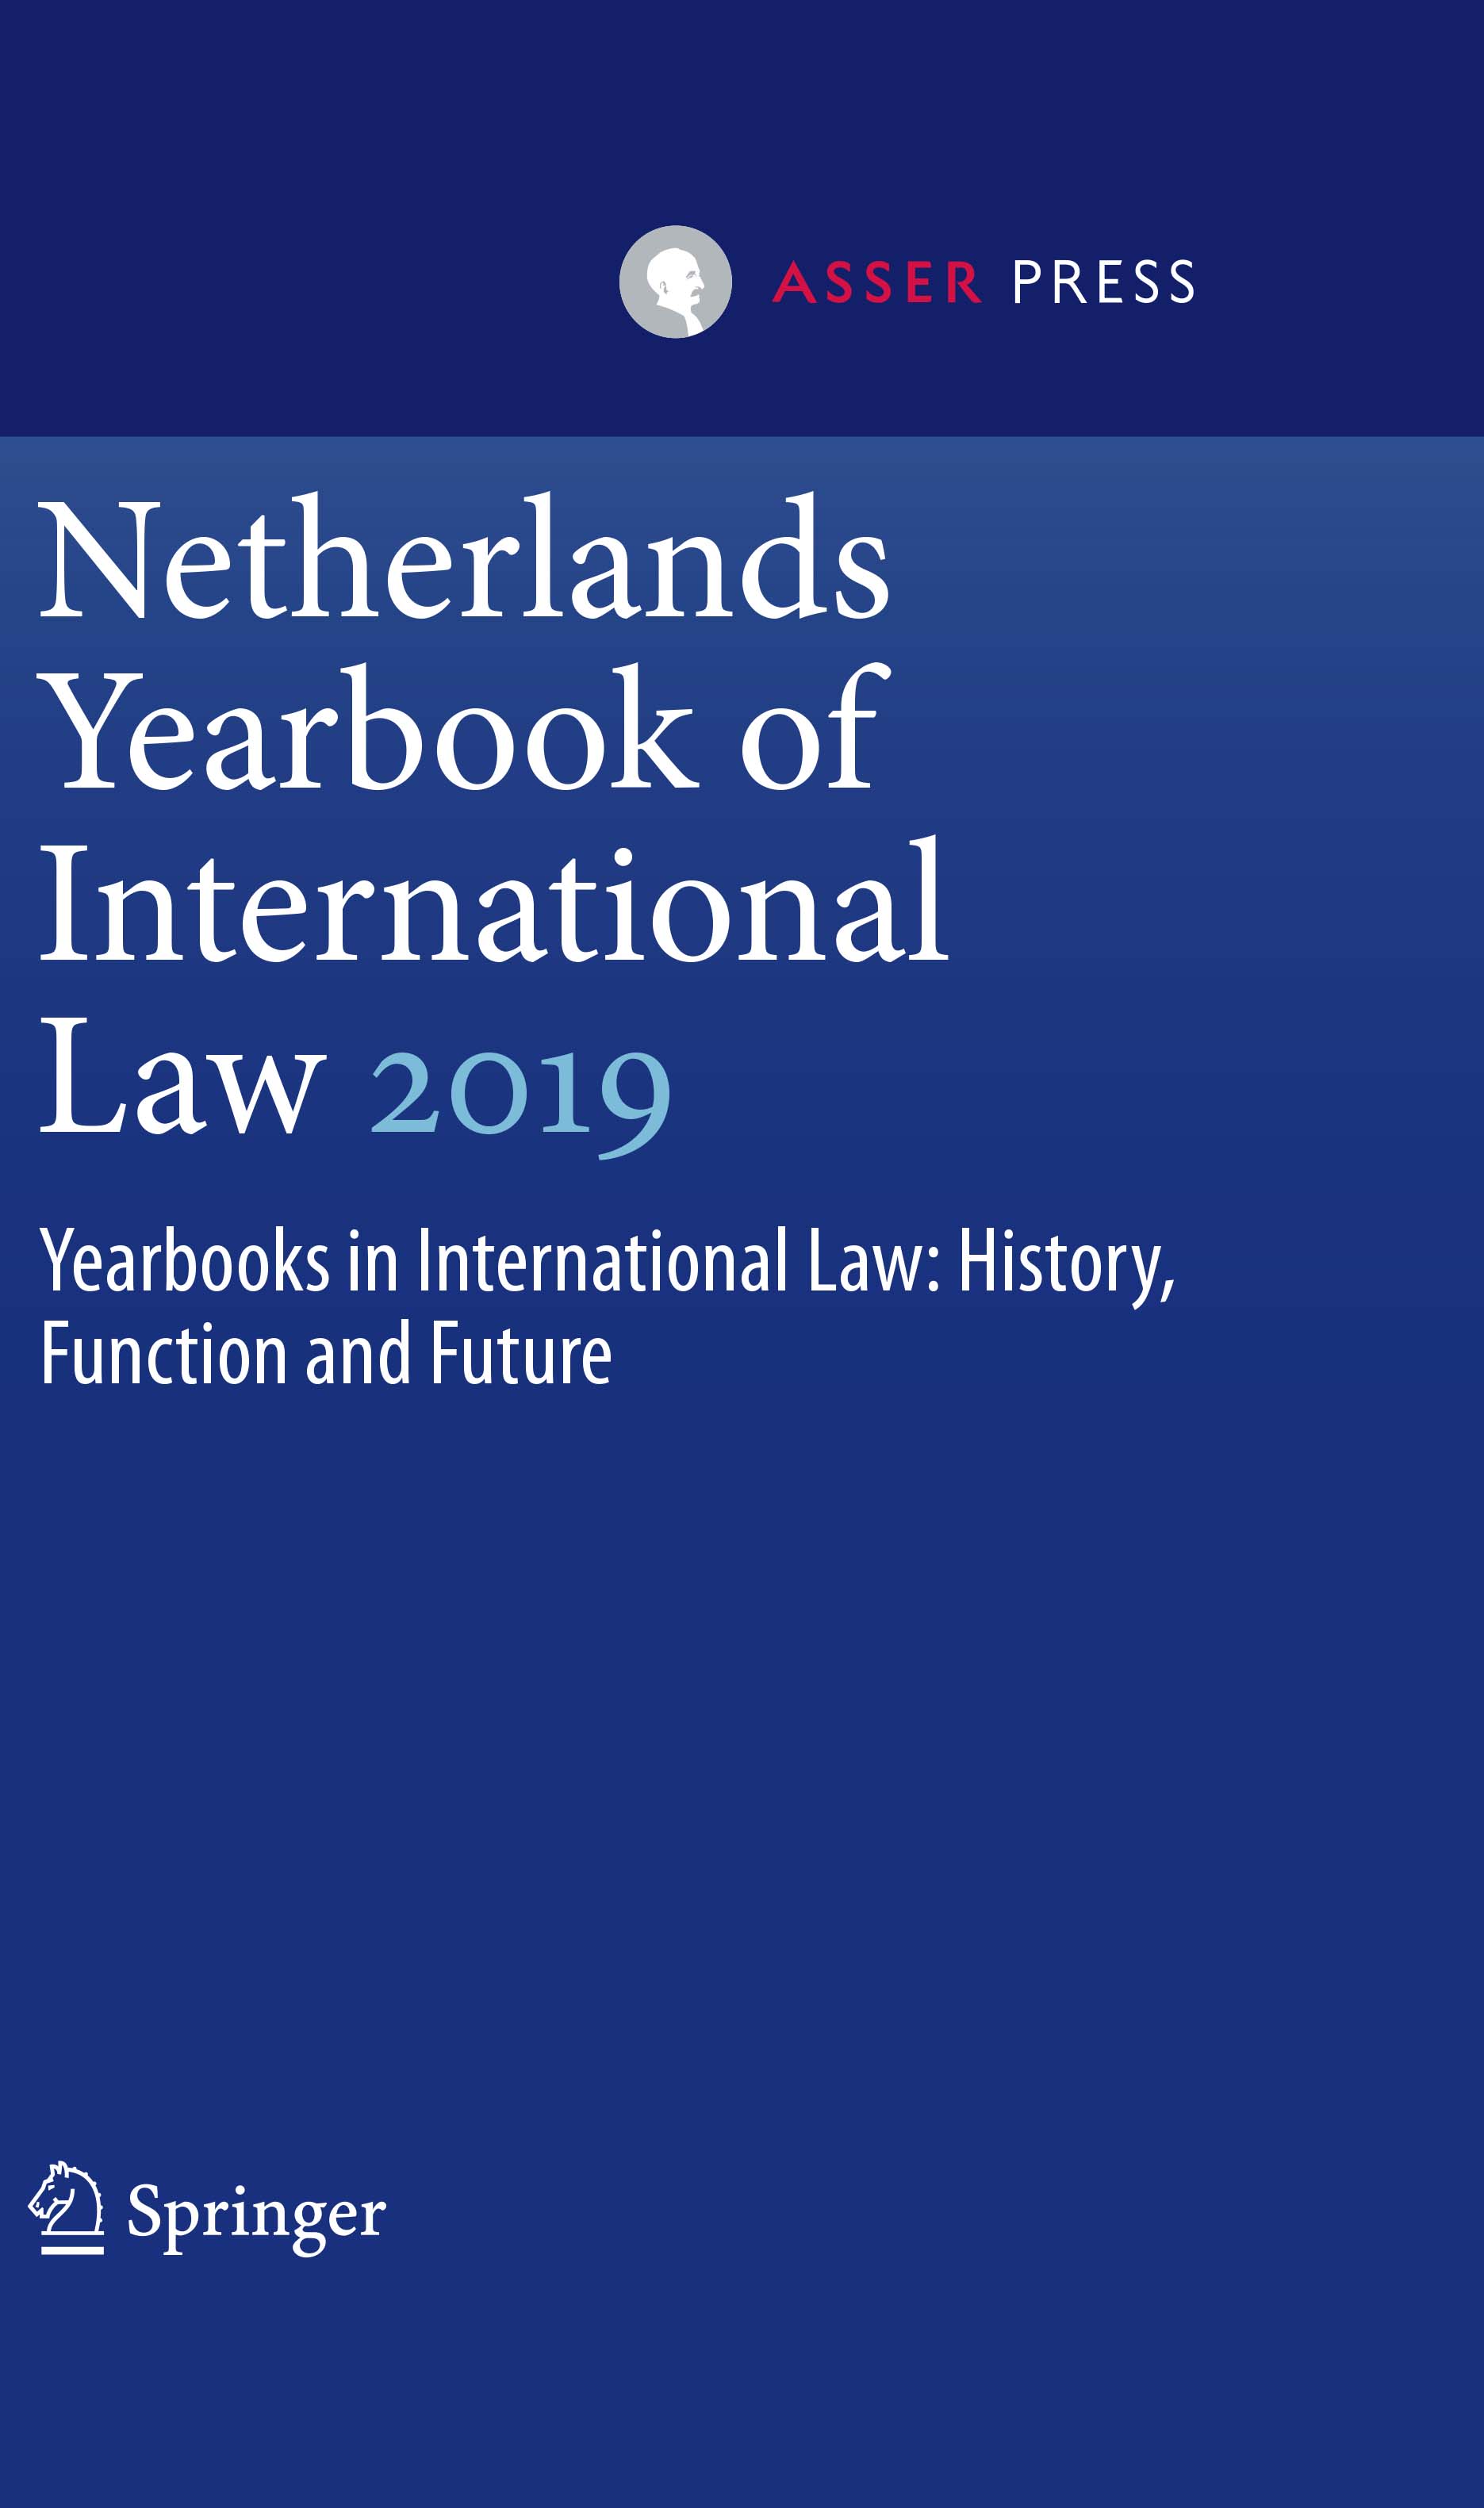 Netherlands Yearbook of International Law 2019, Volume 50 - Yearbooks in International Law: History, Function and Future (50th Volume)